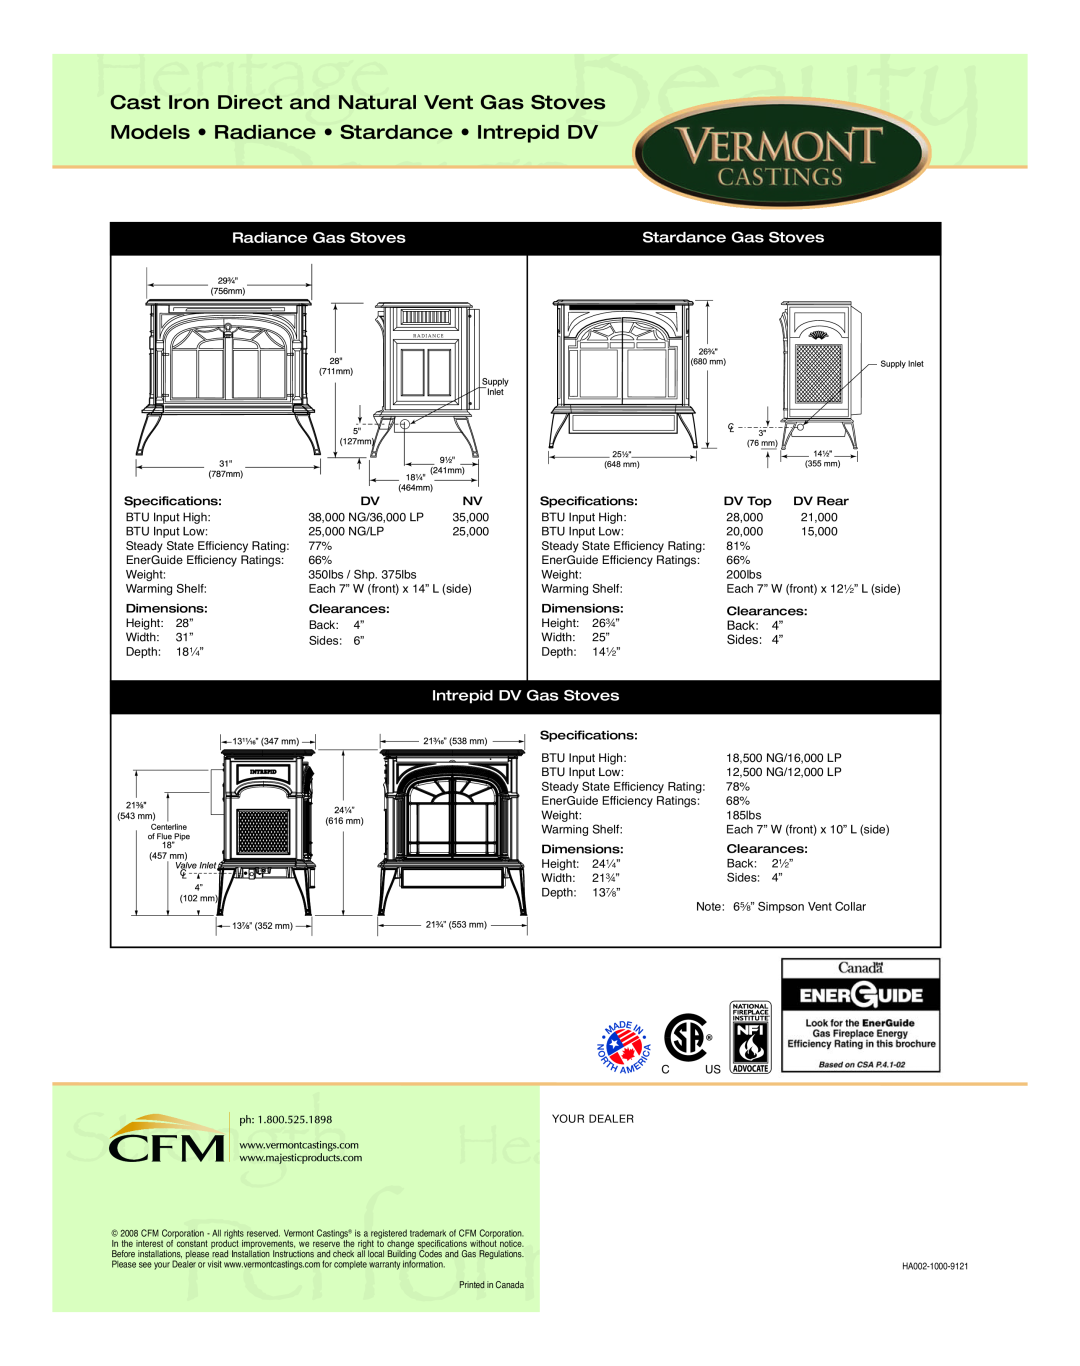 Vermont Casting manual Cast Iron Direct and Natural Vent Gas Stoves, Models Radiance Stardance Intrepid DV 